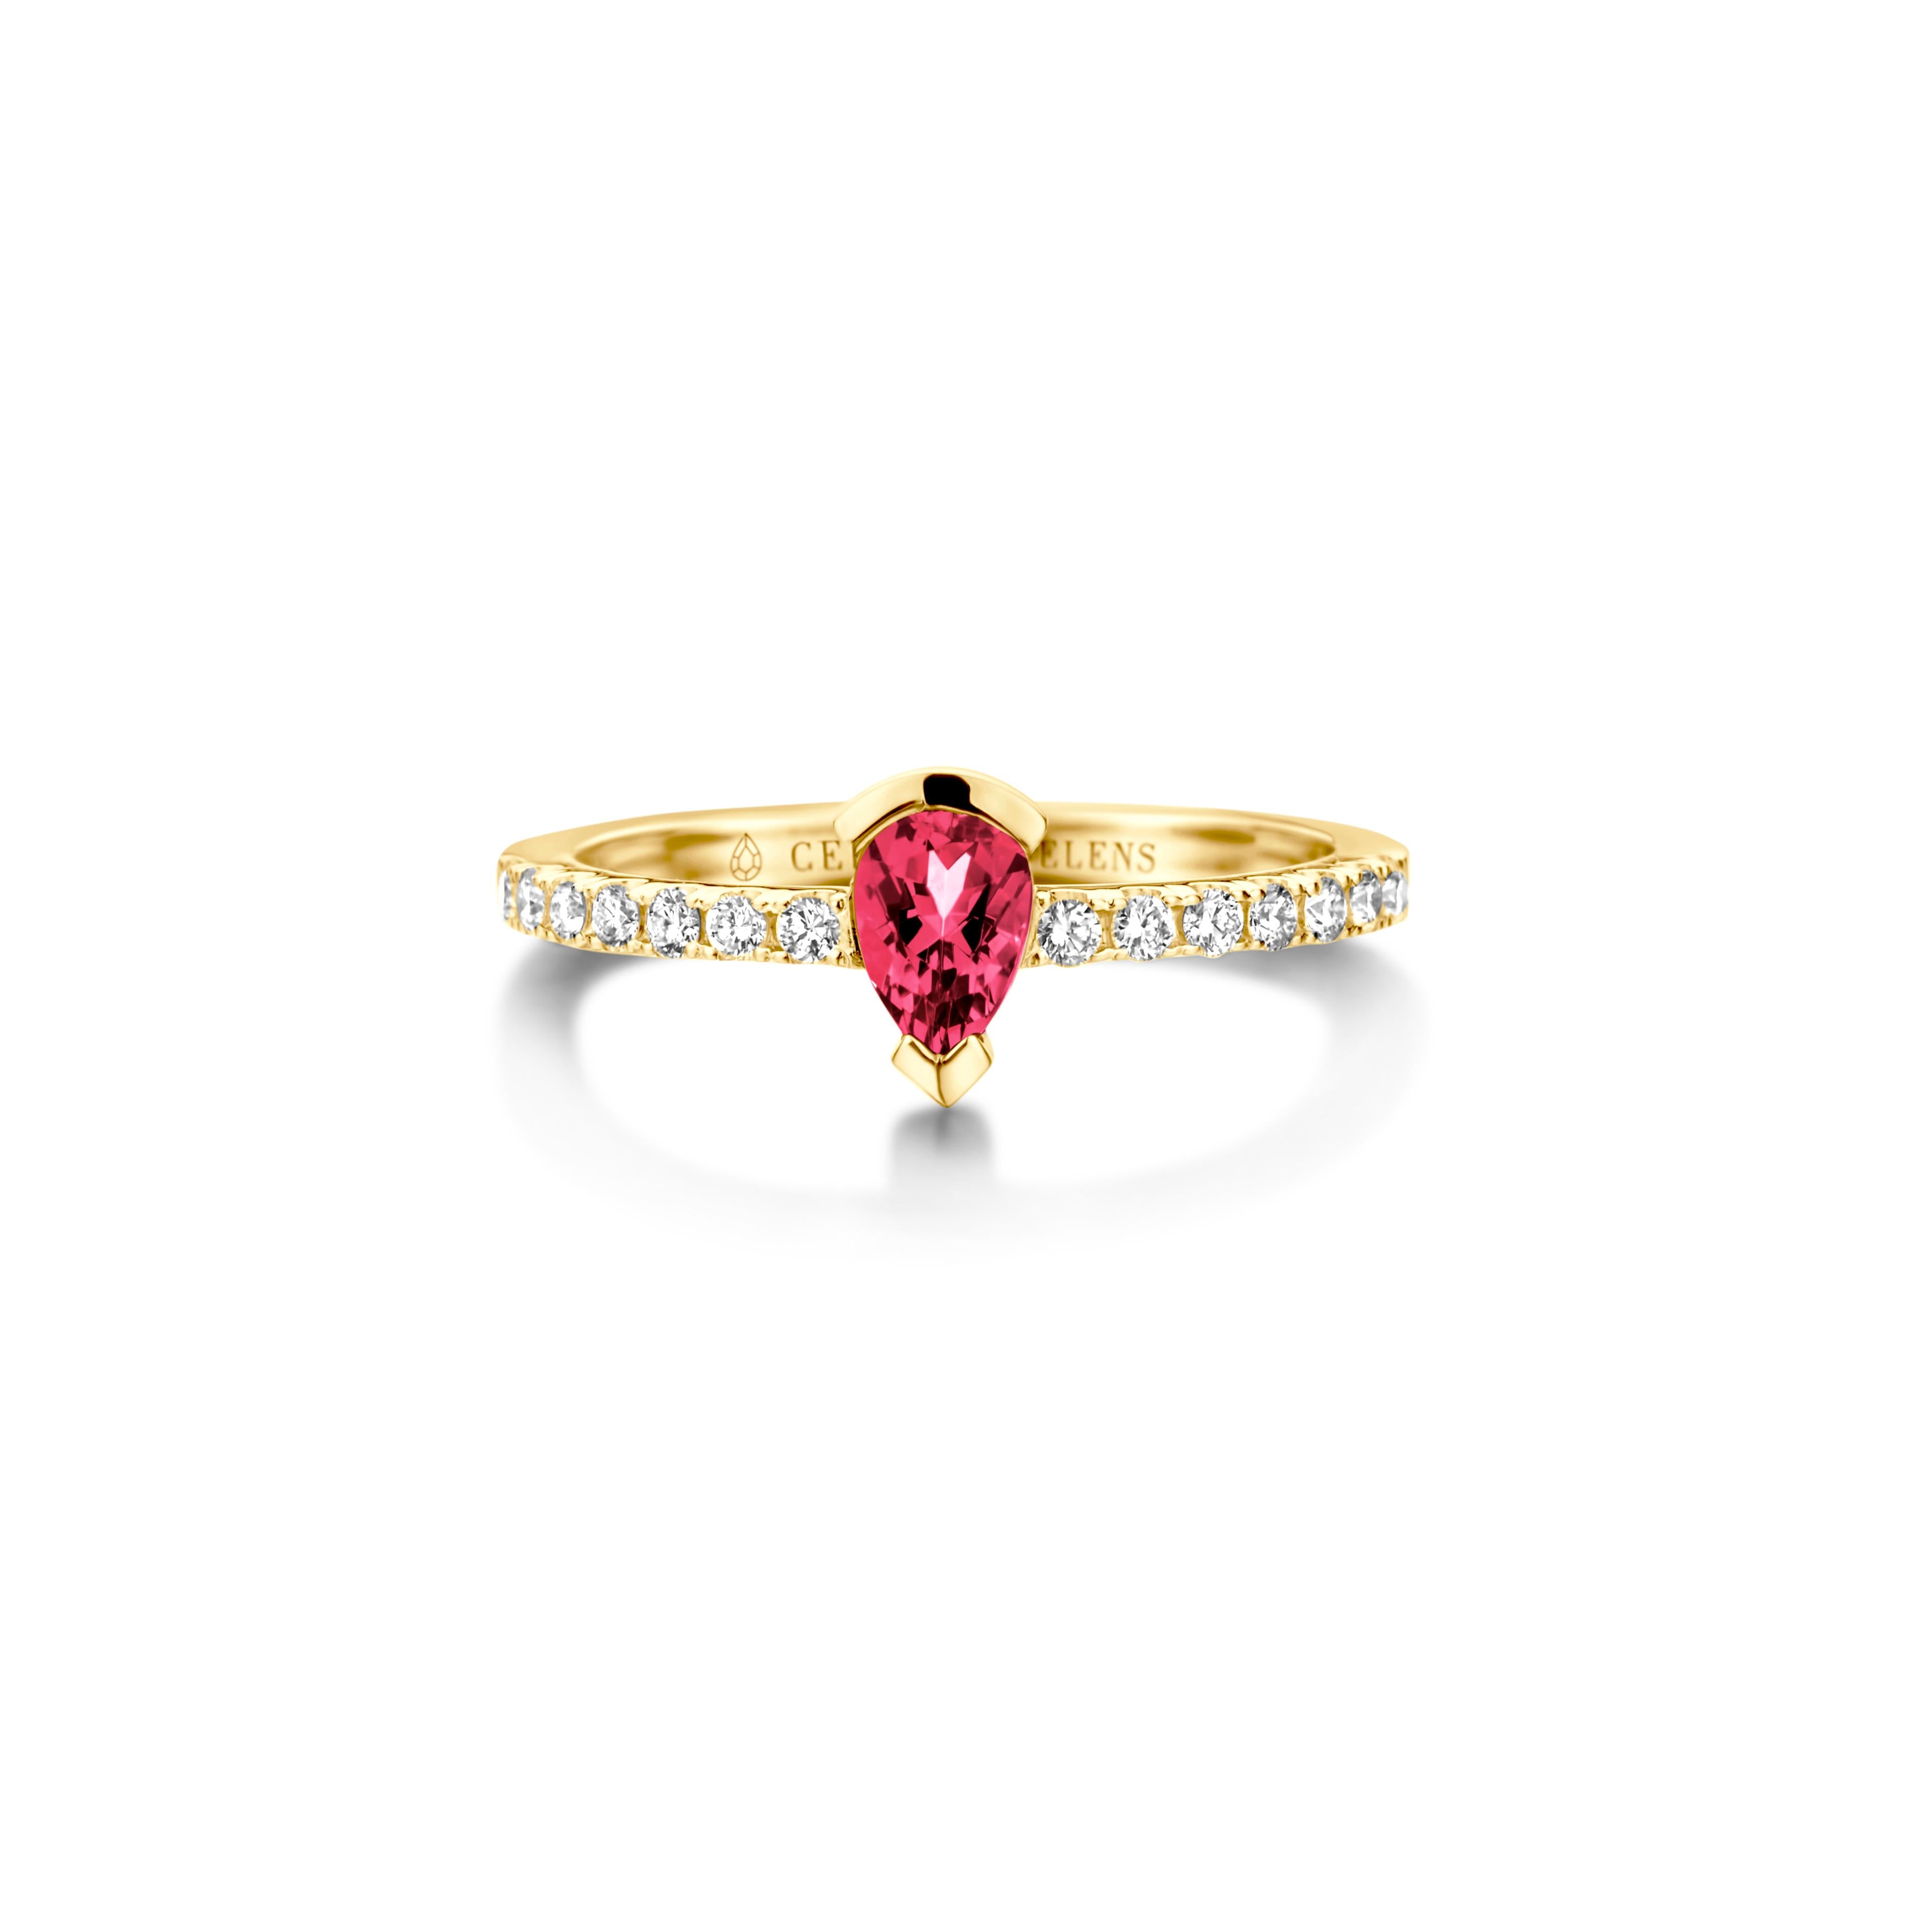 Adeline Straight ring in 18Kt rose gold set with a pear-shaped Rubelite and 0,24 Ct of white brilliant cut diamonds - VS F quality. Also, available in yellow gold and white gold. Celine Roelens, a goldsmith and gemologist, is specialized in unique,